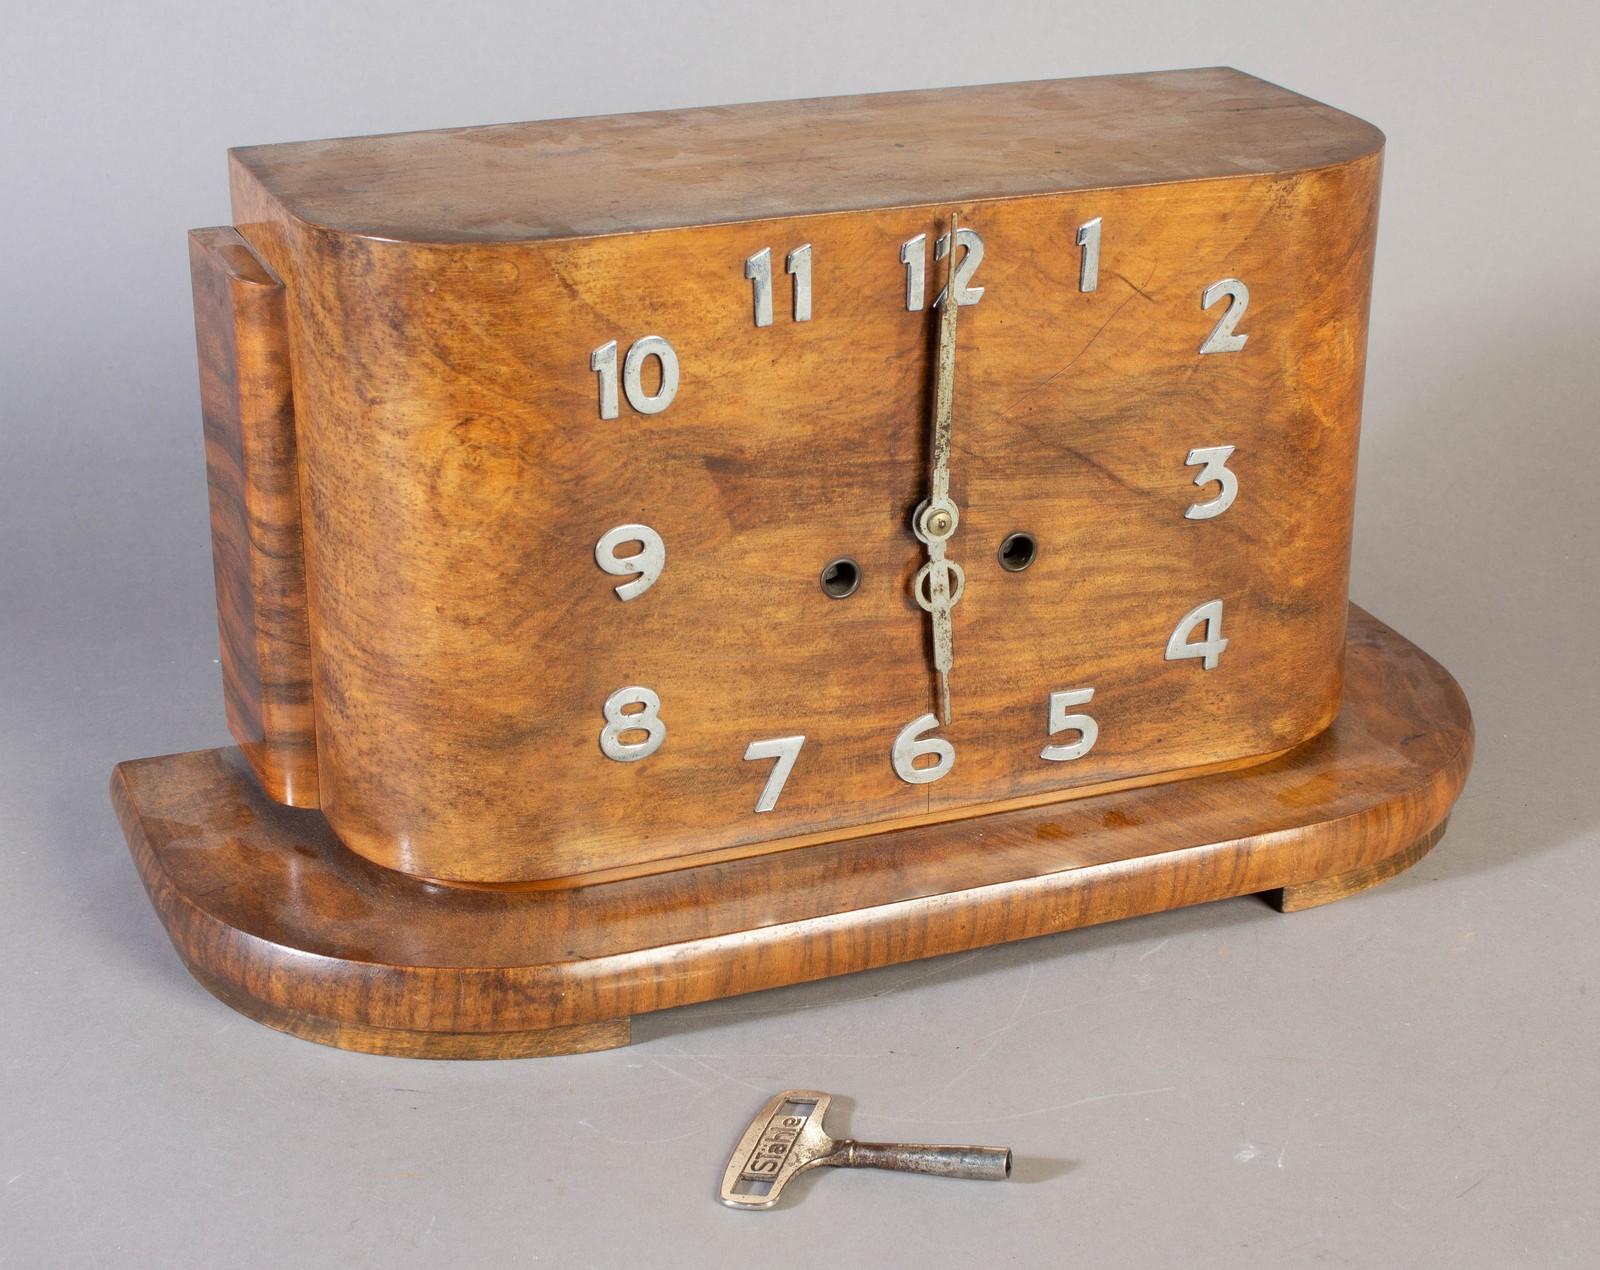 Softwood with nut veneer, chromed clock-face
Still in original condition with new springs in fully working condition.